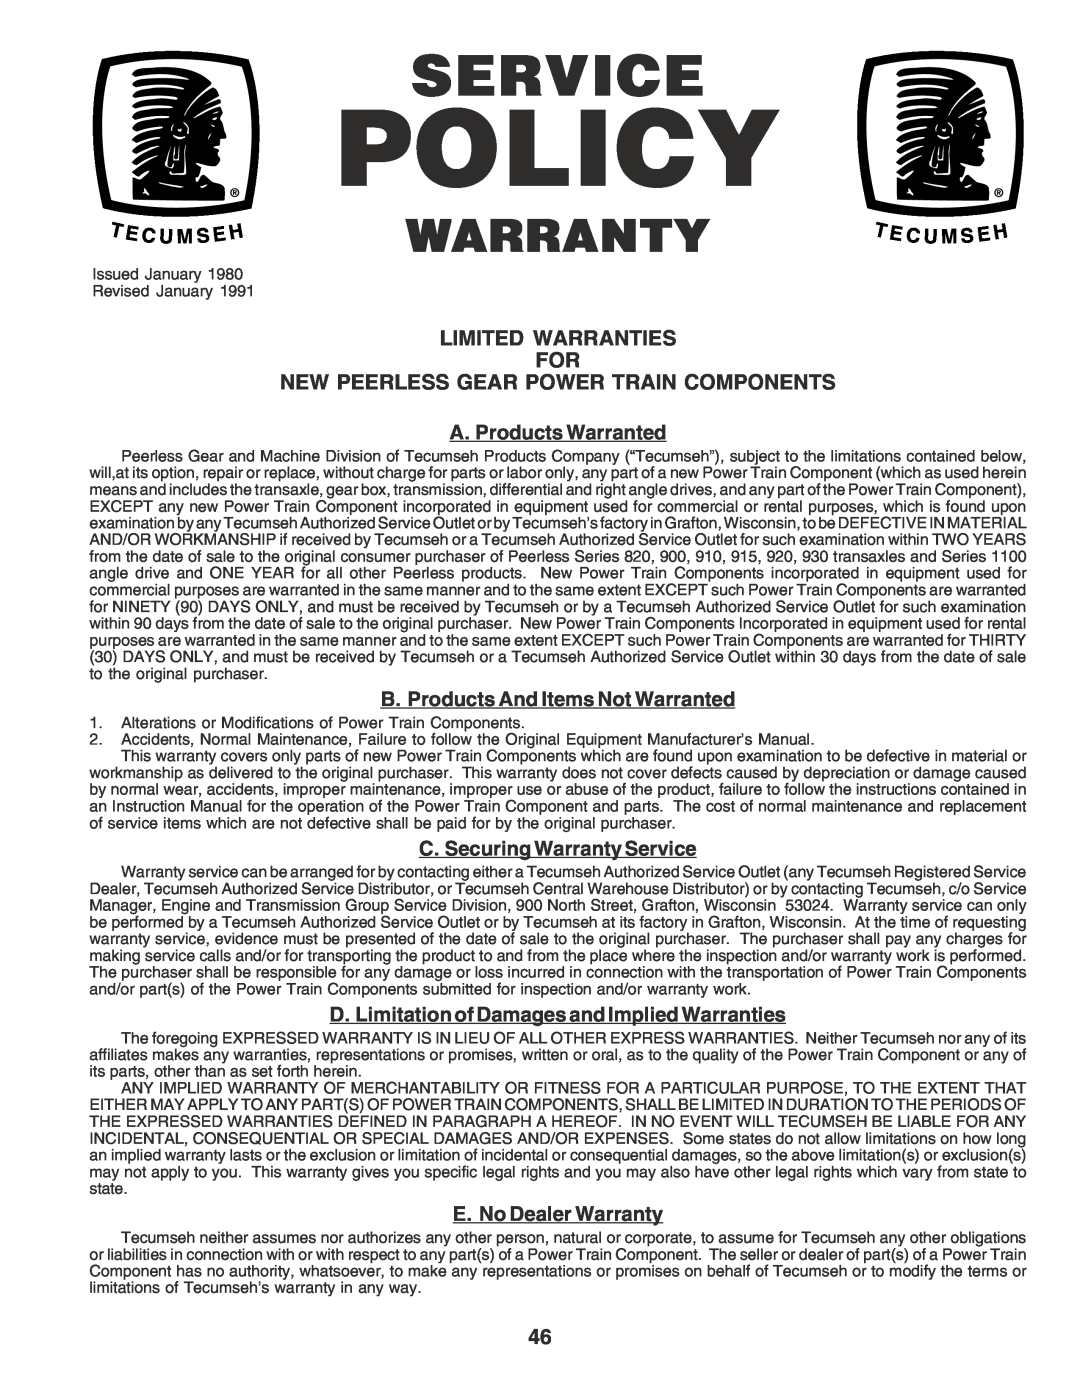 Poulan PR17542STC owner manual Limited Warranties For New Peerless Gear Power Train Components, Policy 